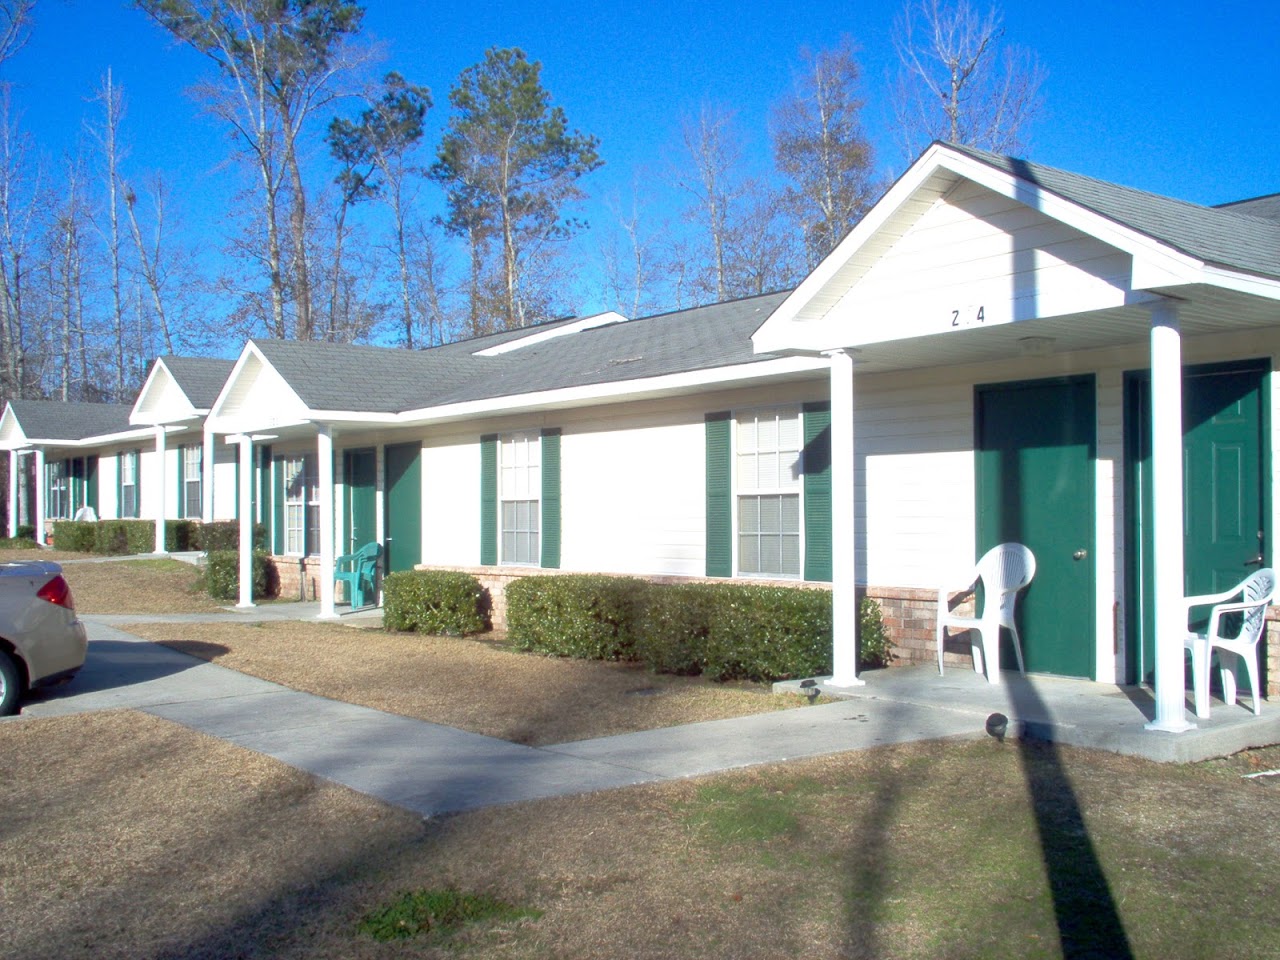 Photo of CAMELLIA GARDENS. Affordable housing located at 901 FREEDOM RD CENTURY, FL 32535